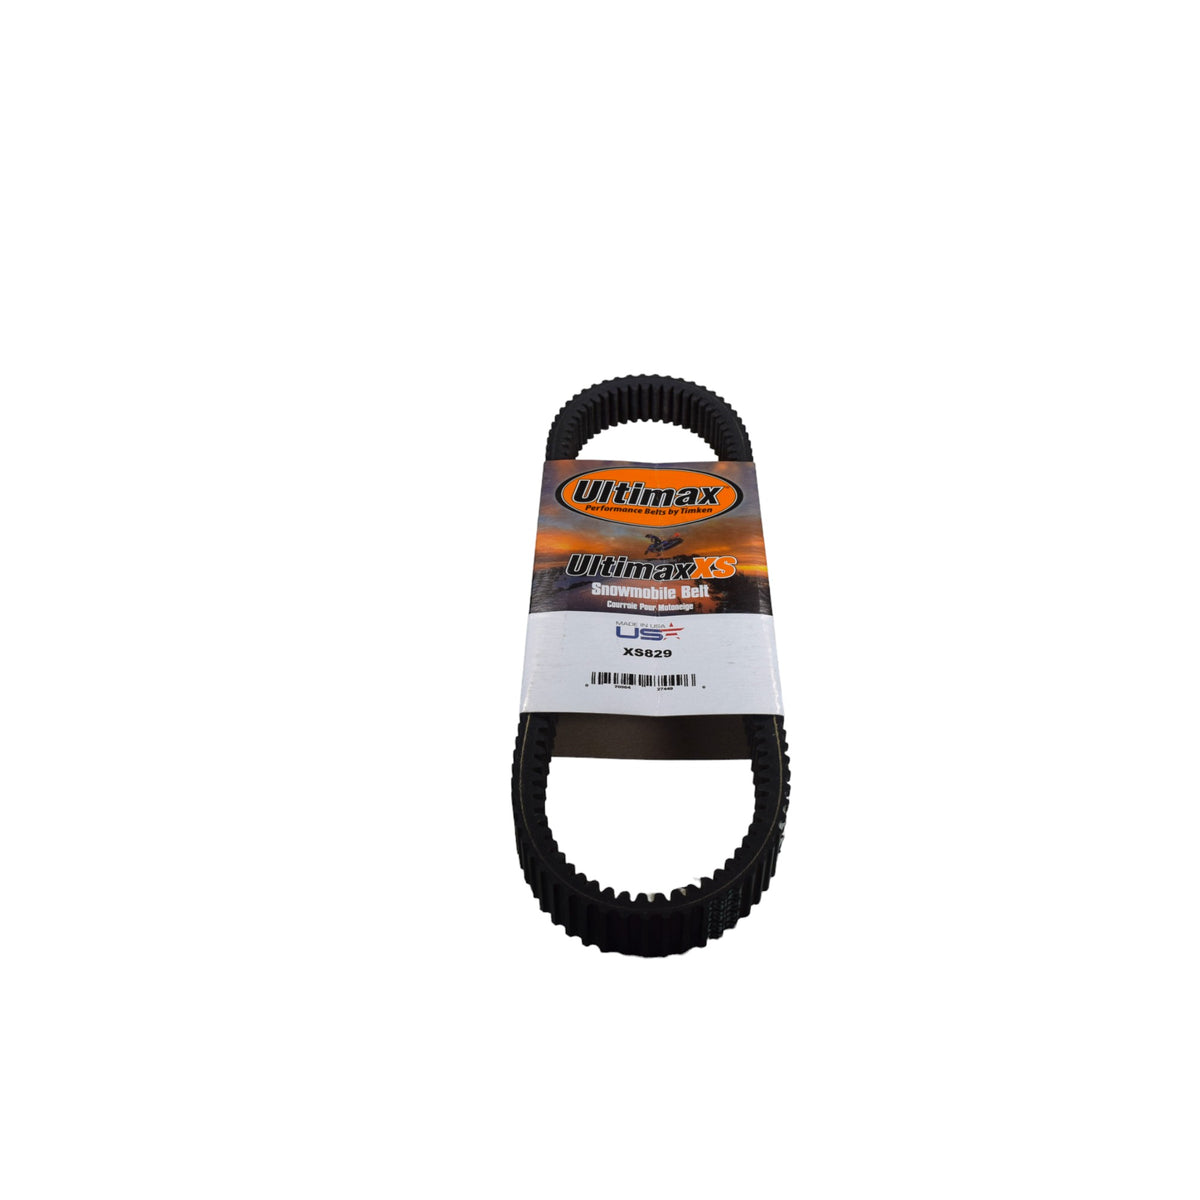 Ultimax XS829 Drive Belt for ARCTIC CAT OEM Replacement for 0627-110, 0627-112 (Made in USA)